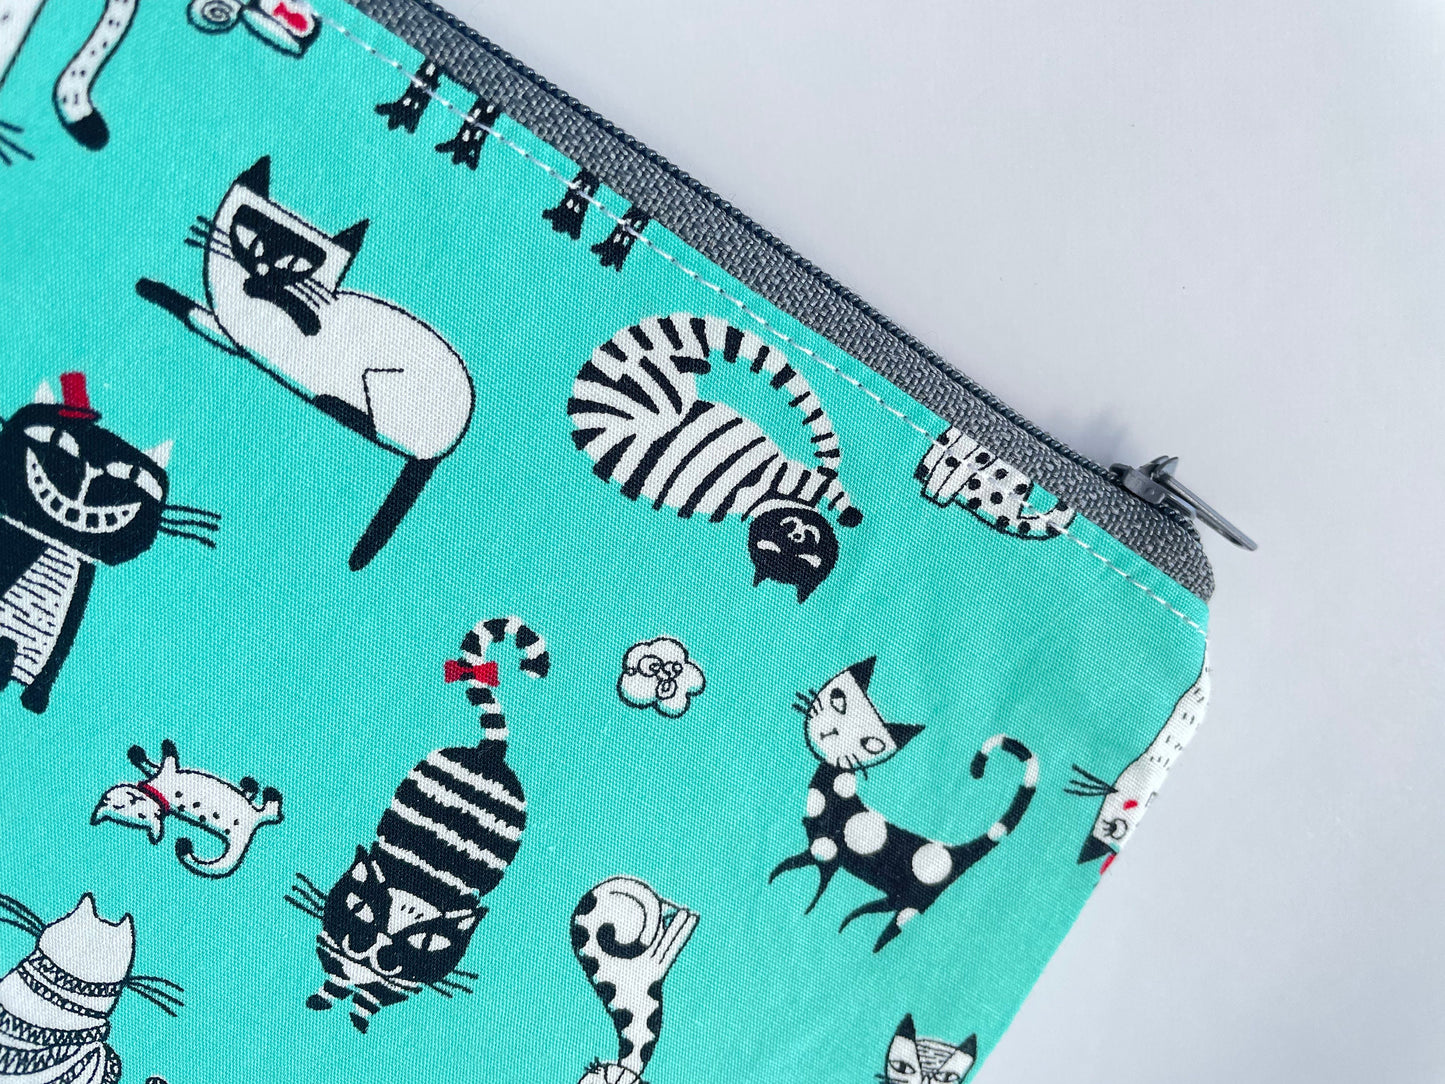 Cat Print Zippered Knitting Notions Bag - Portable Craft Case